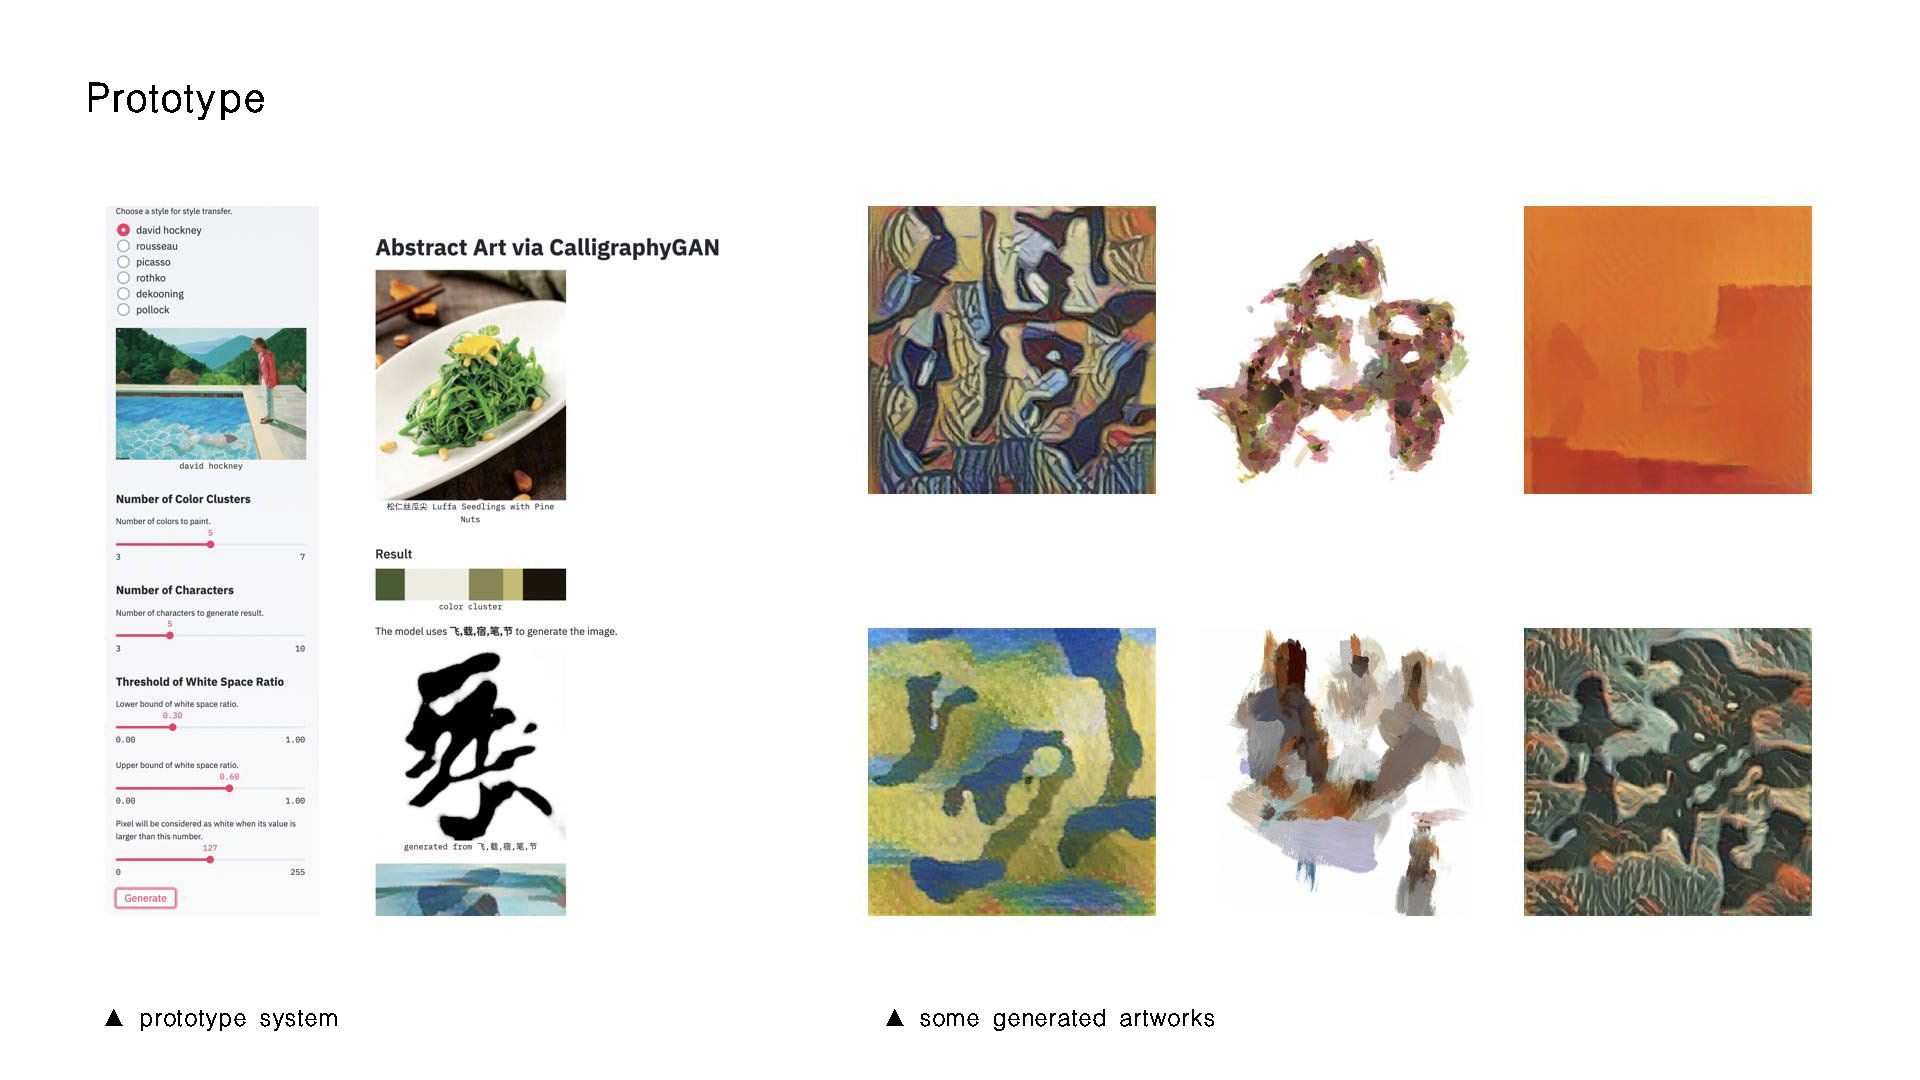 Artificial intelligence transforms guests' recipes into personalized abstract artworks